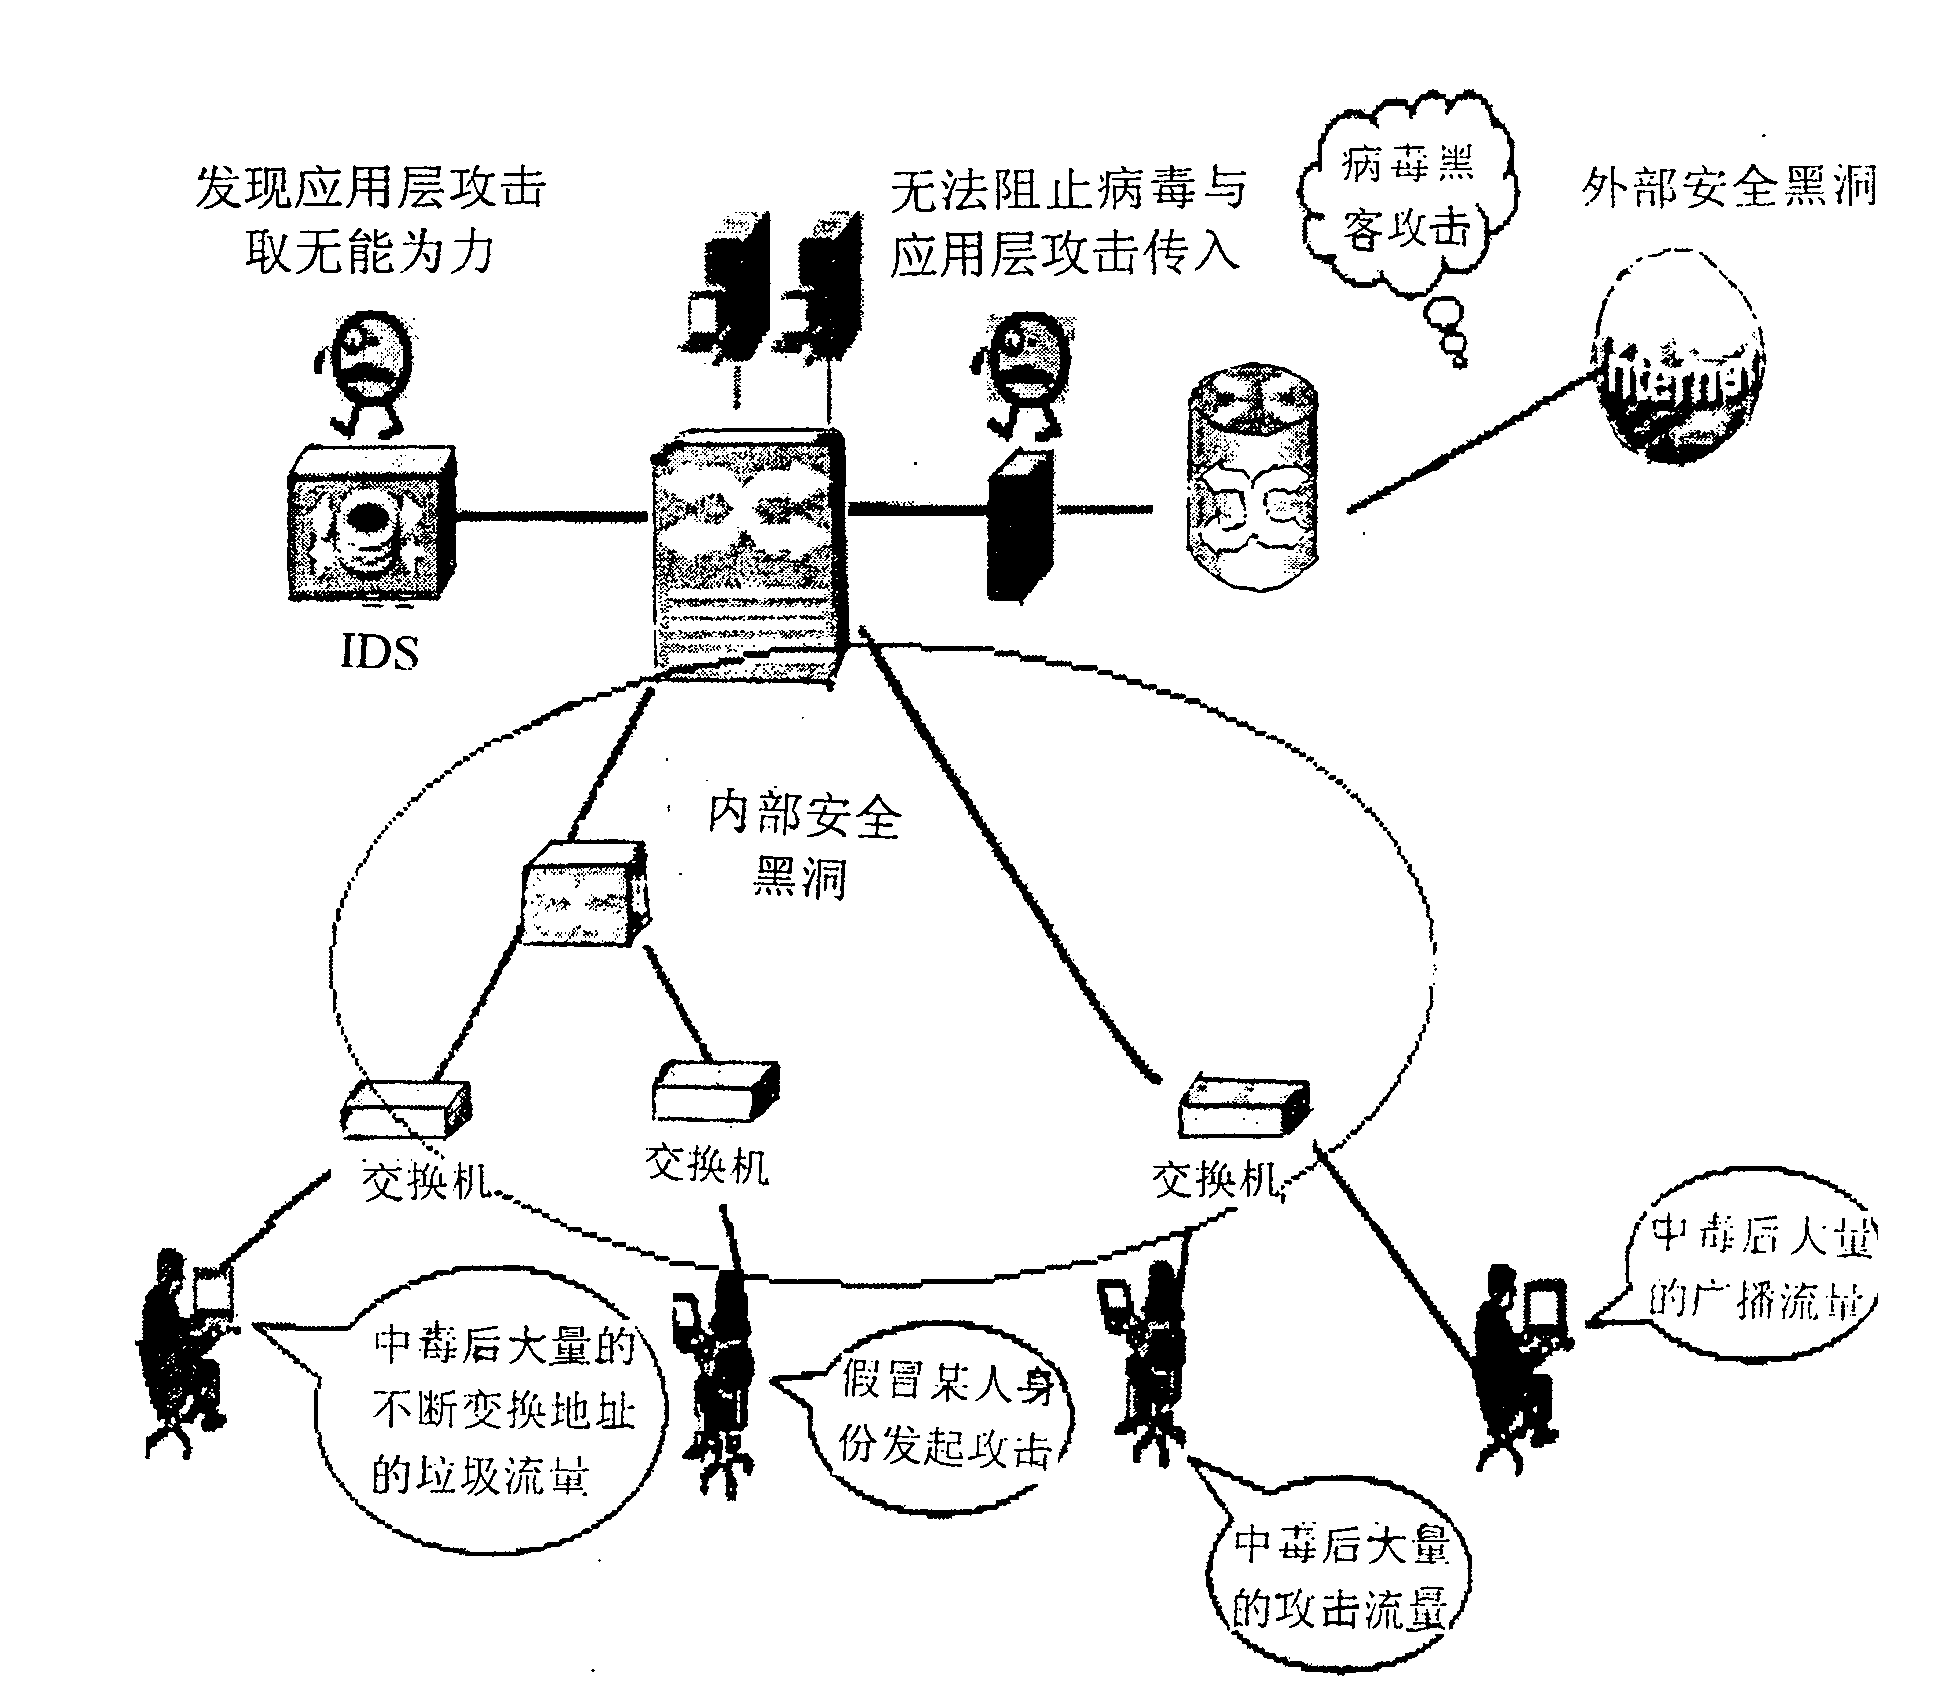 Method for building globle network safety system in tracing to the source in each sub domain